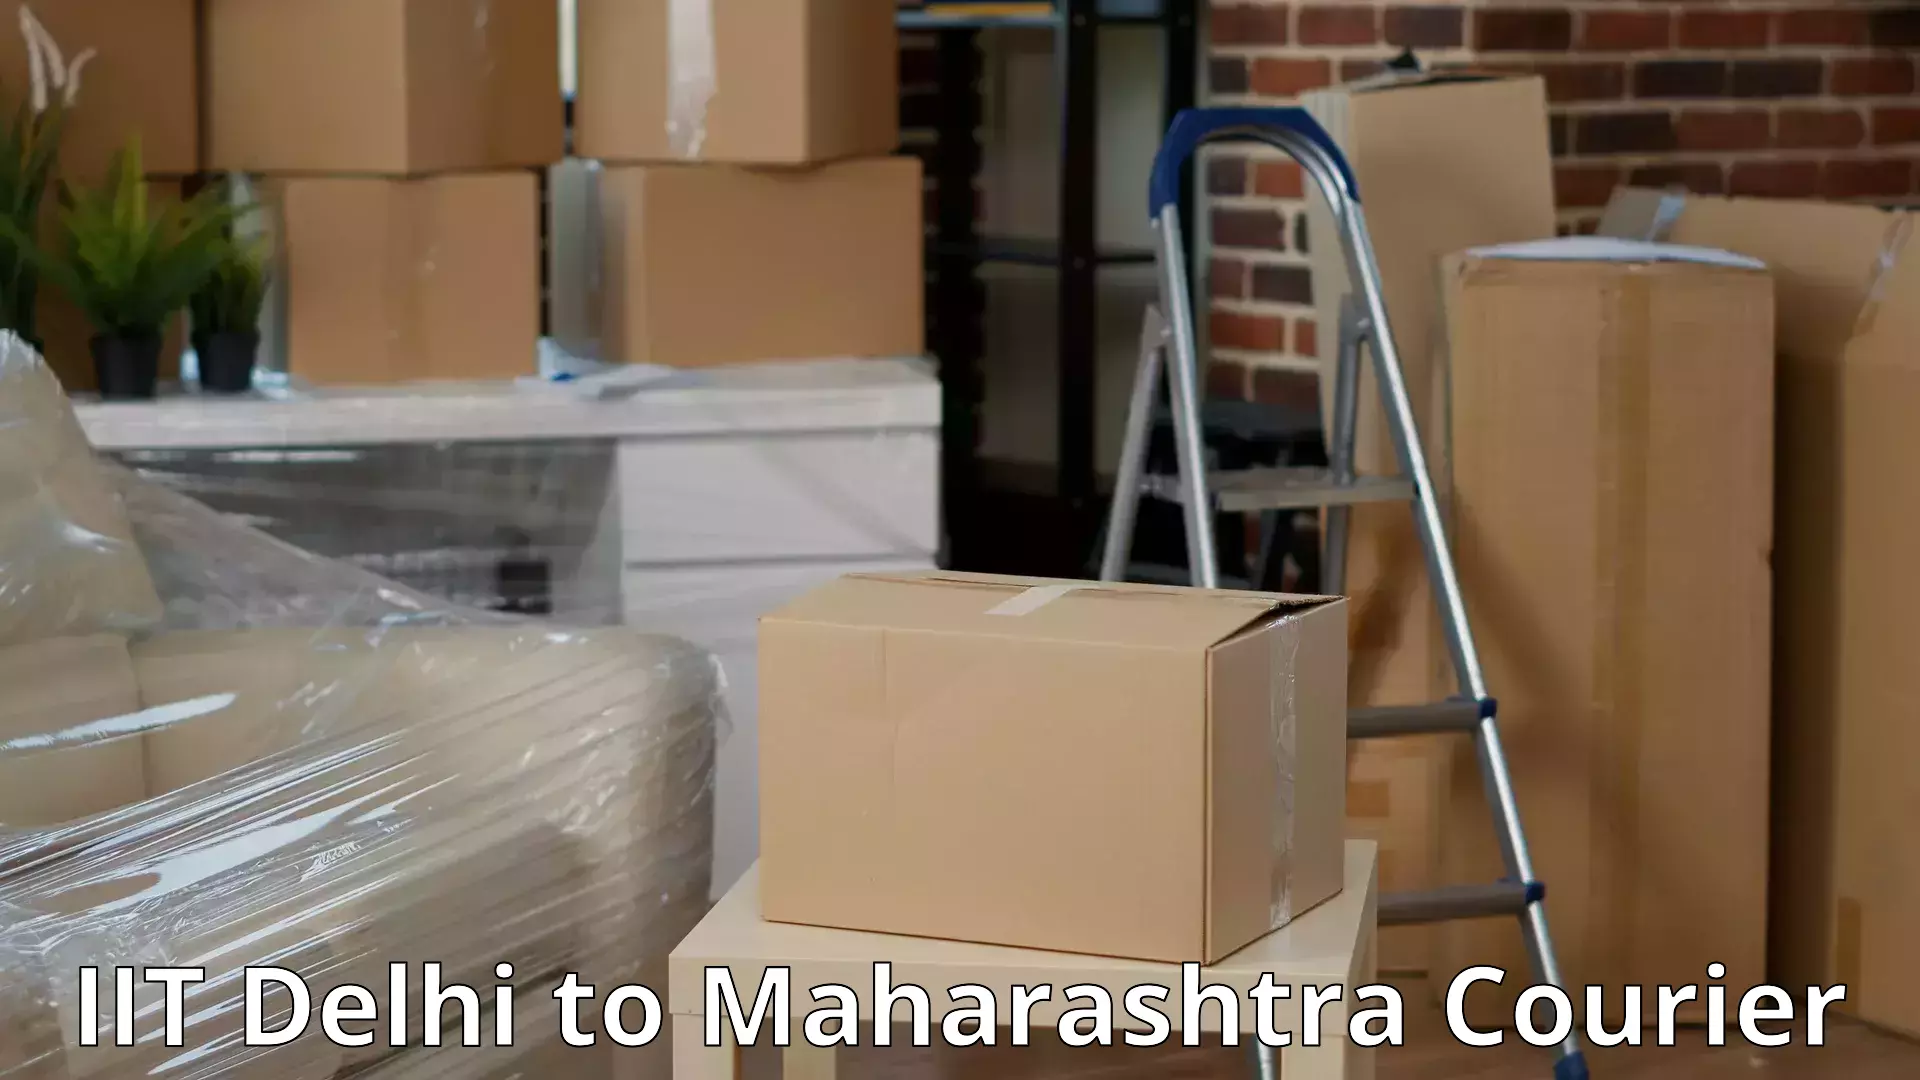 Quality moving and storage in IIT Delhi to Mumbai